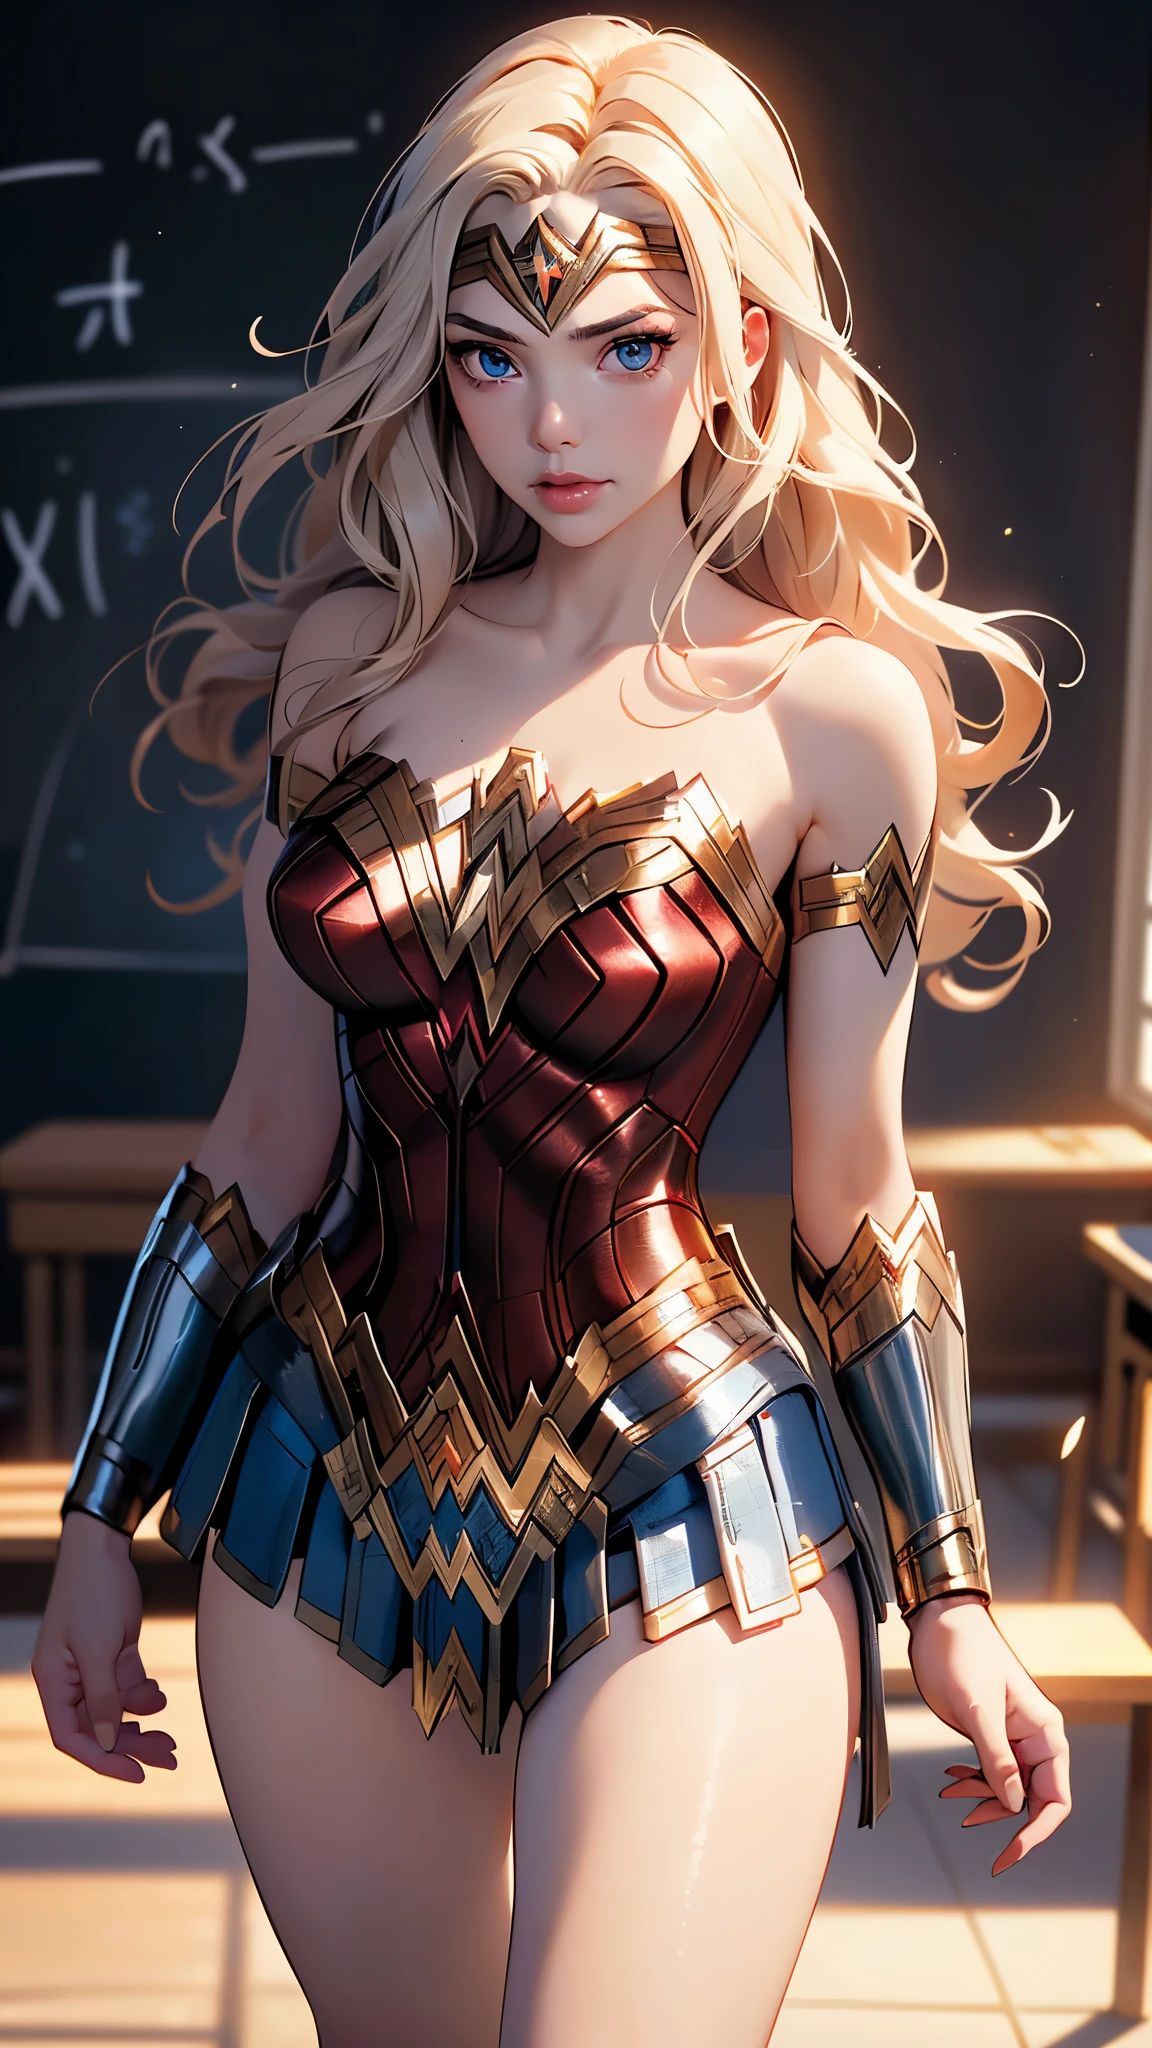 score_9, score_8_up, score_7_up, score_6_up,
rating_explicit, 
1girl, ((18YO:1.2)), Adult, full lips,  big clear eyes, light blue eyes, ((blond hair:1)), (long wavy hair: 1.2),  
(female teacher wonder woman :1.4) , (in a classroom:1.4) , slightly tanned skin, (miniskirt rojo:1.4), (wonder woman:1.4) 
two breast out, open shirt, showing breasts, lying on desk, (squeezing tits:1.4) , grabbing dildo. amused, light smile, eyes looking up, white shirt, black jacket, black pencil skirt, top view, showing pussy dripping, (colores brillantes), ,( ciberpunk 2.1), (background numbers mathematics blackboard :1.4), (math numbers flying through the air :1.4),( hojas de papel en el aire :1.4), (wall newspaper :1.4) 